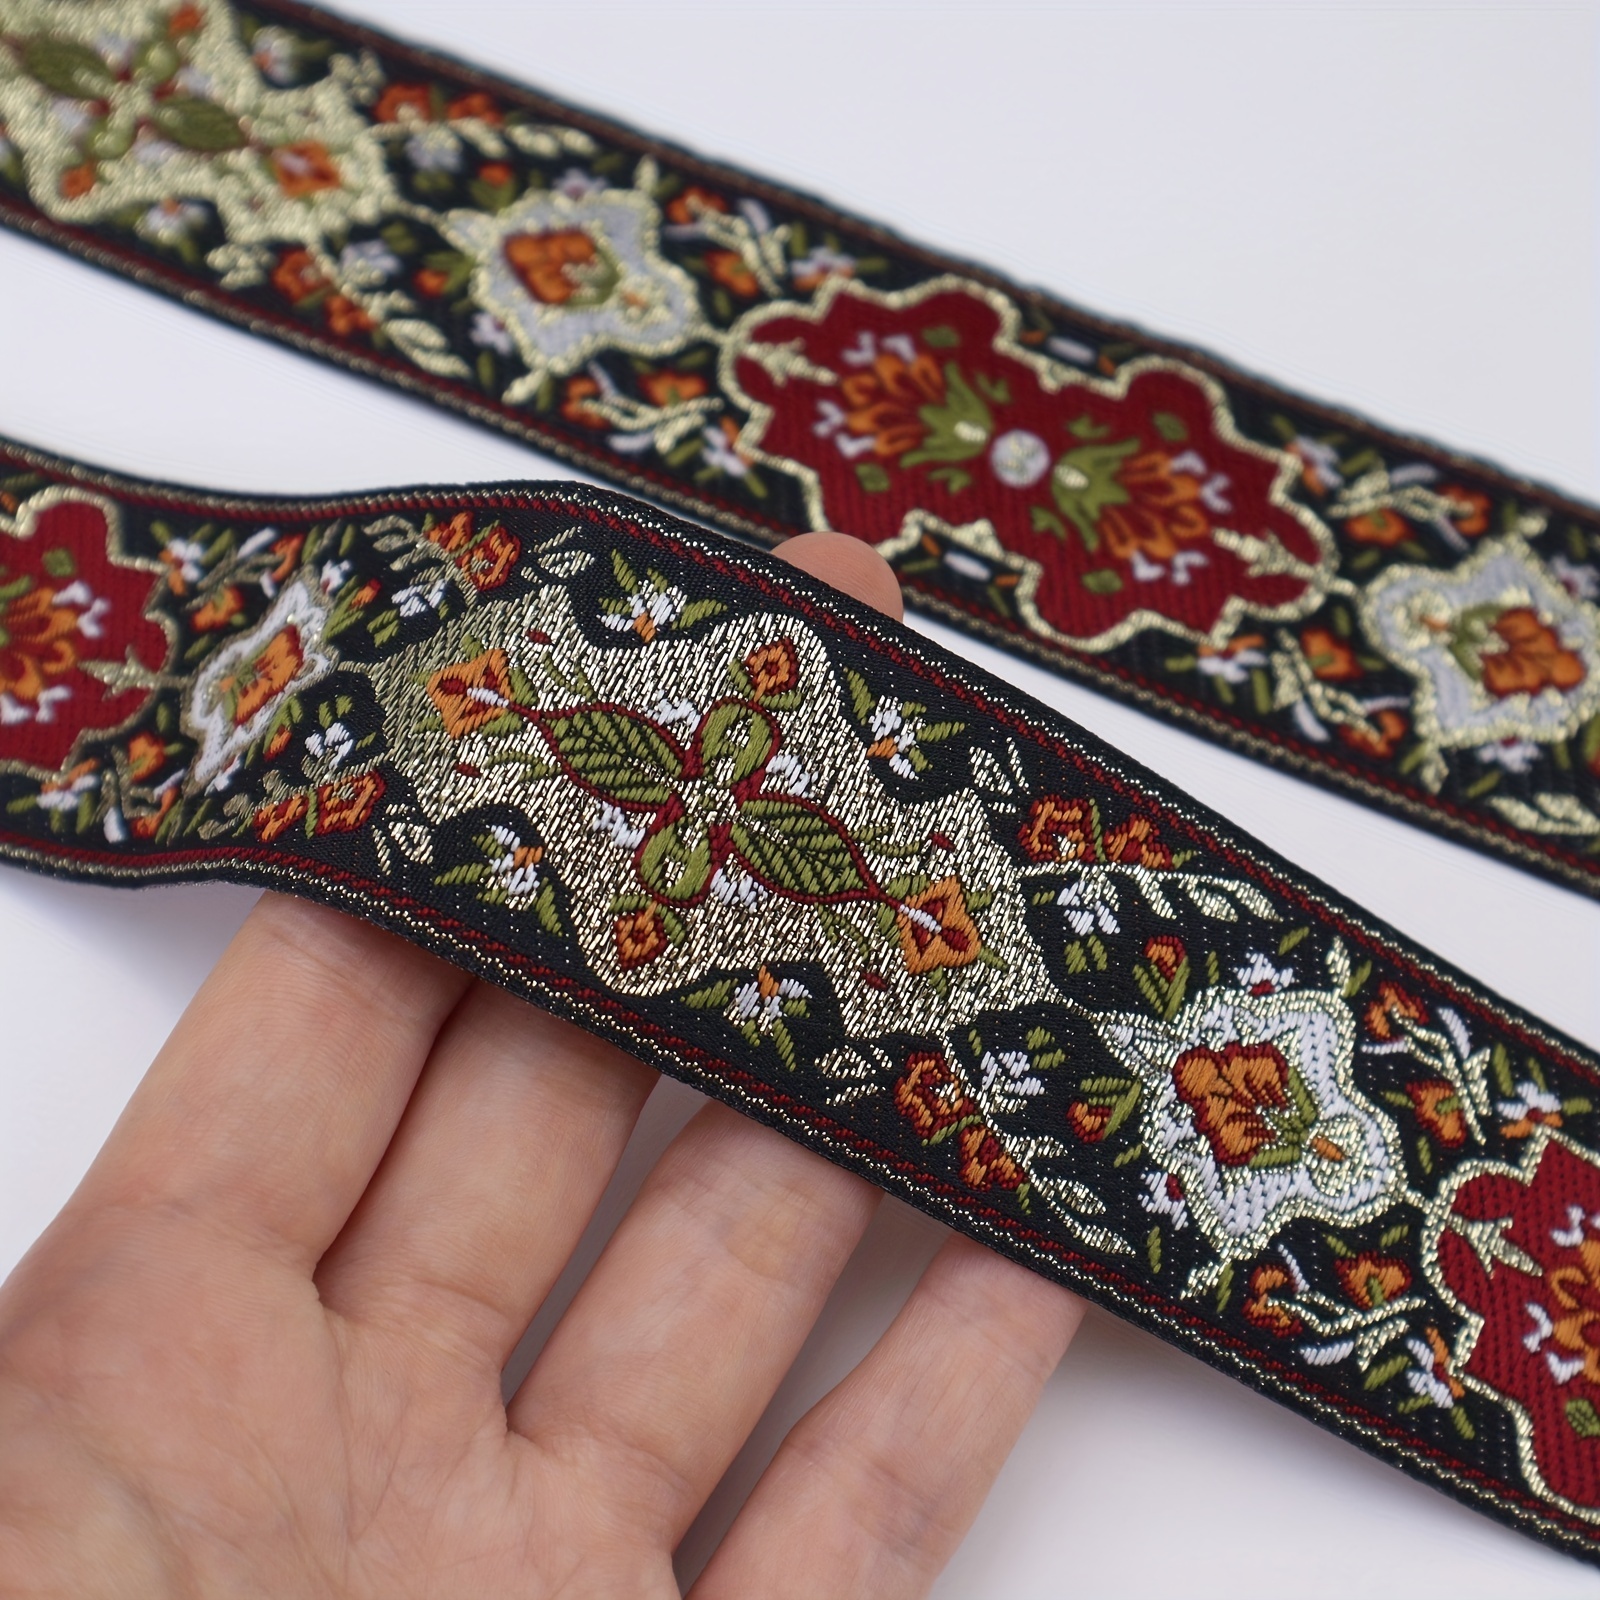 7 Yards Jacquard Ribbon Vintage Woven Trim 2 Inch Floral Woven Embroidered  Ribbon Fabric DIY for Embellishment Craft Supplies Clothes Strap Sewing  Decor Trim 